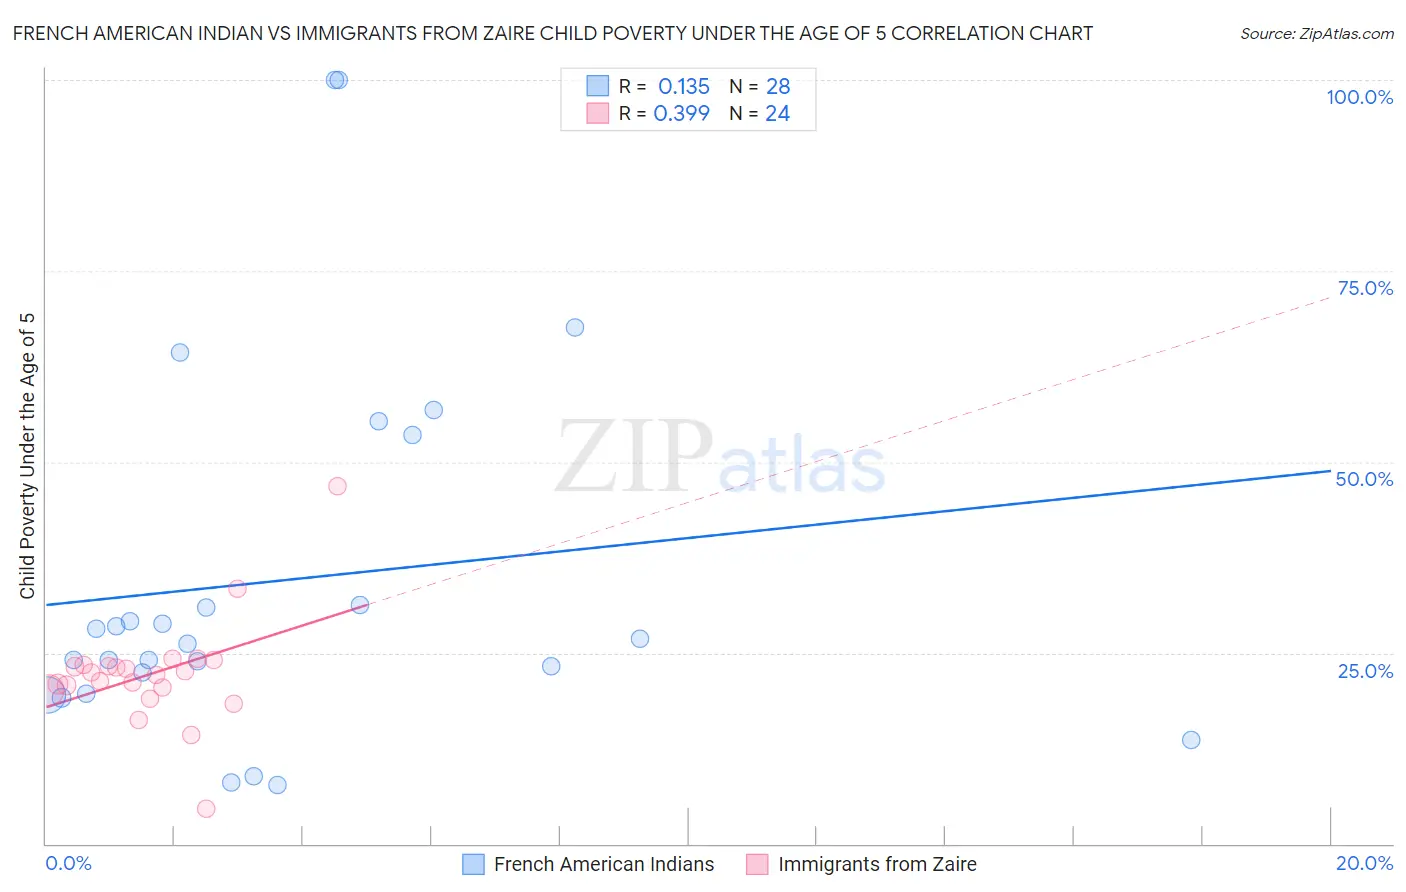 French American Indian vs Immigrants from Zaire Child Poverty Under the Age of 5